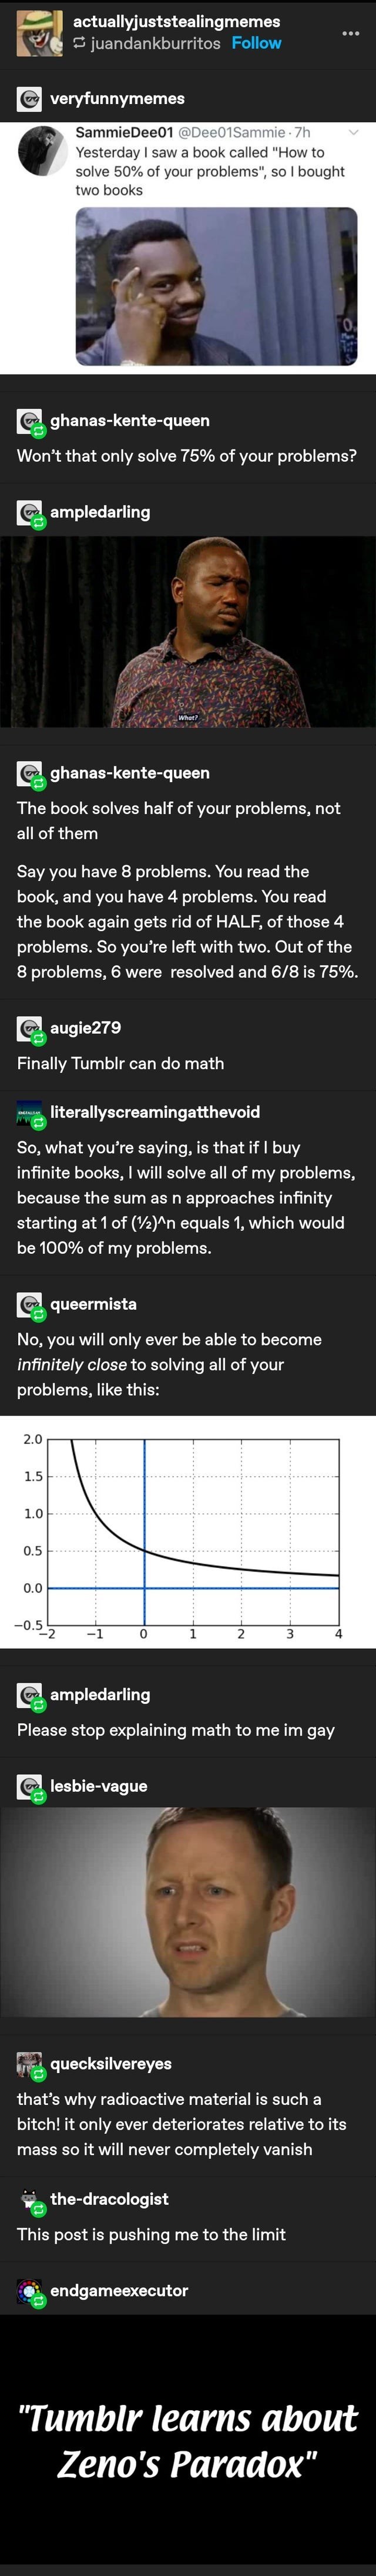 screenshot - actuallyjuststealingmemes juandankburritos @ veryfunnymemes mmie .7h SammieDee01 7h Yesterday I saw a book called "How to solve 50% of your problems", so I bought two books Os la ghanaskentequeen Won't that only solve 75% of your problems? Ca